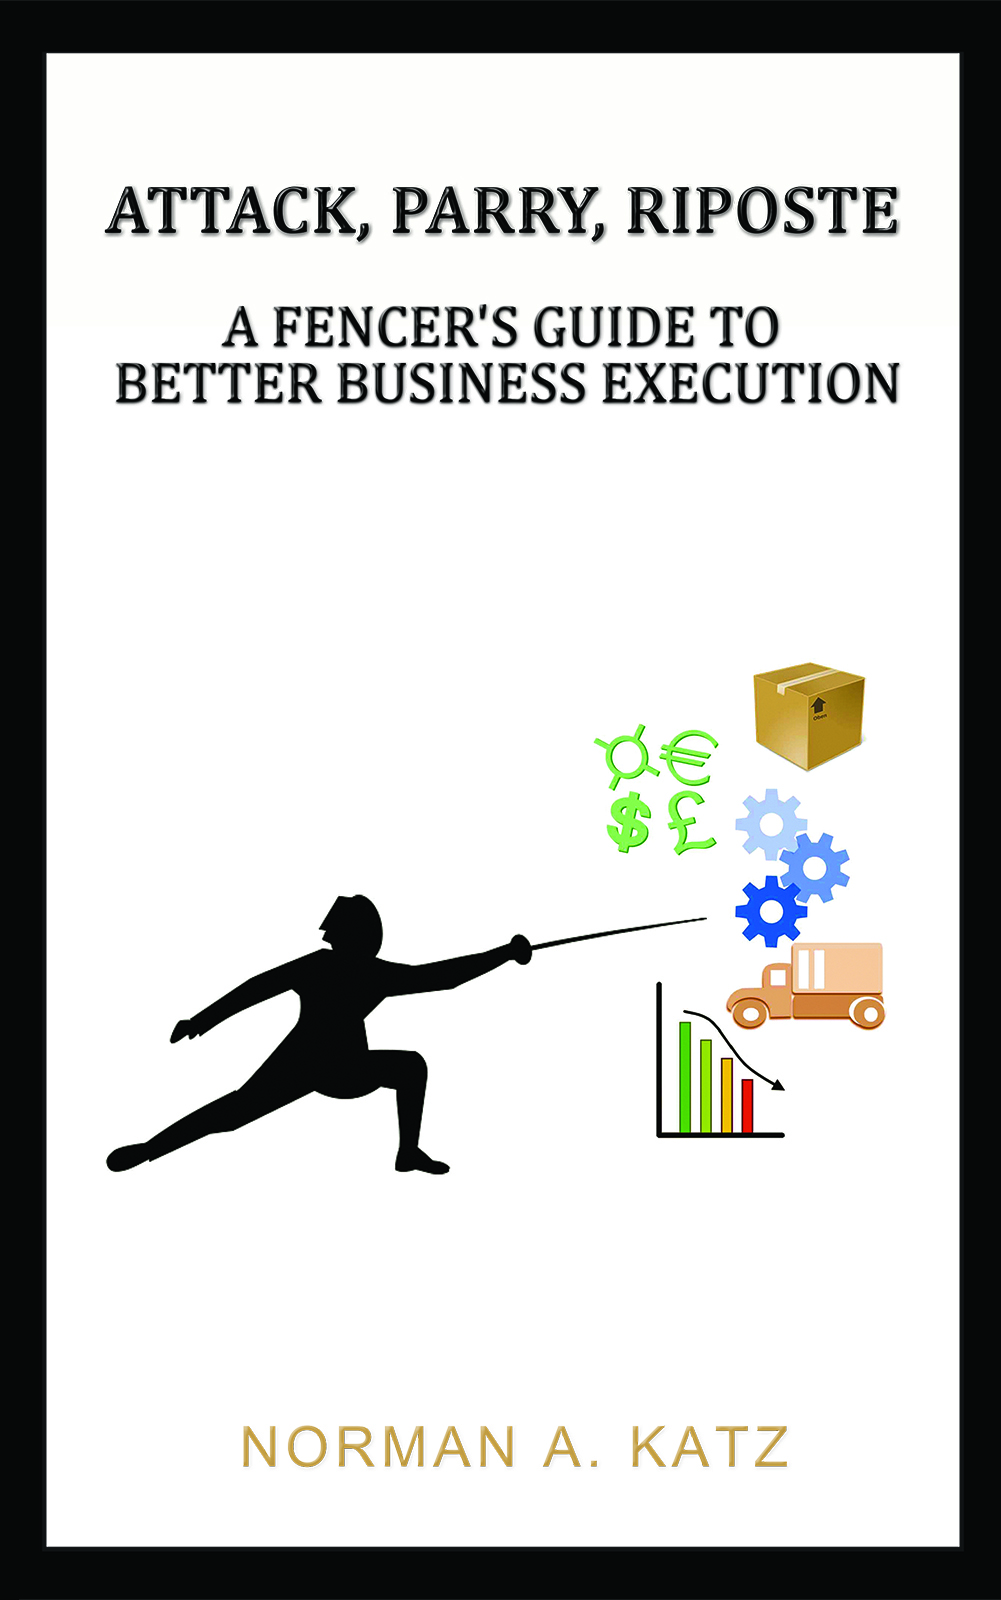 This image is the cover for the book Attack, Parry, Riposte: A Fencer's Guide to Better Business Execution